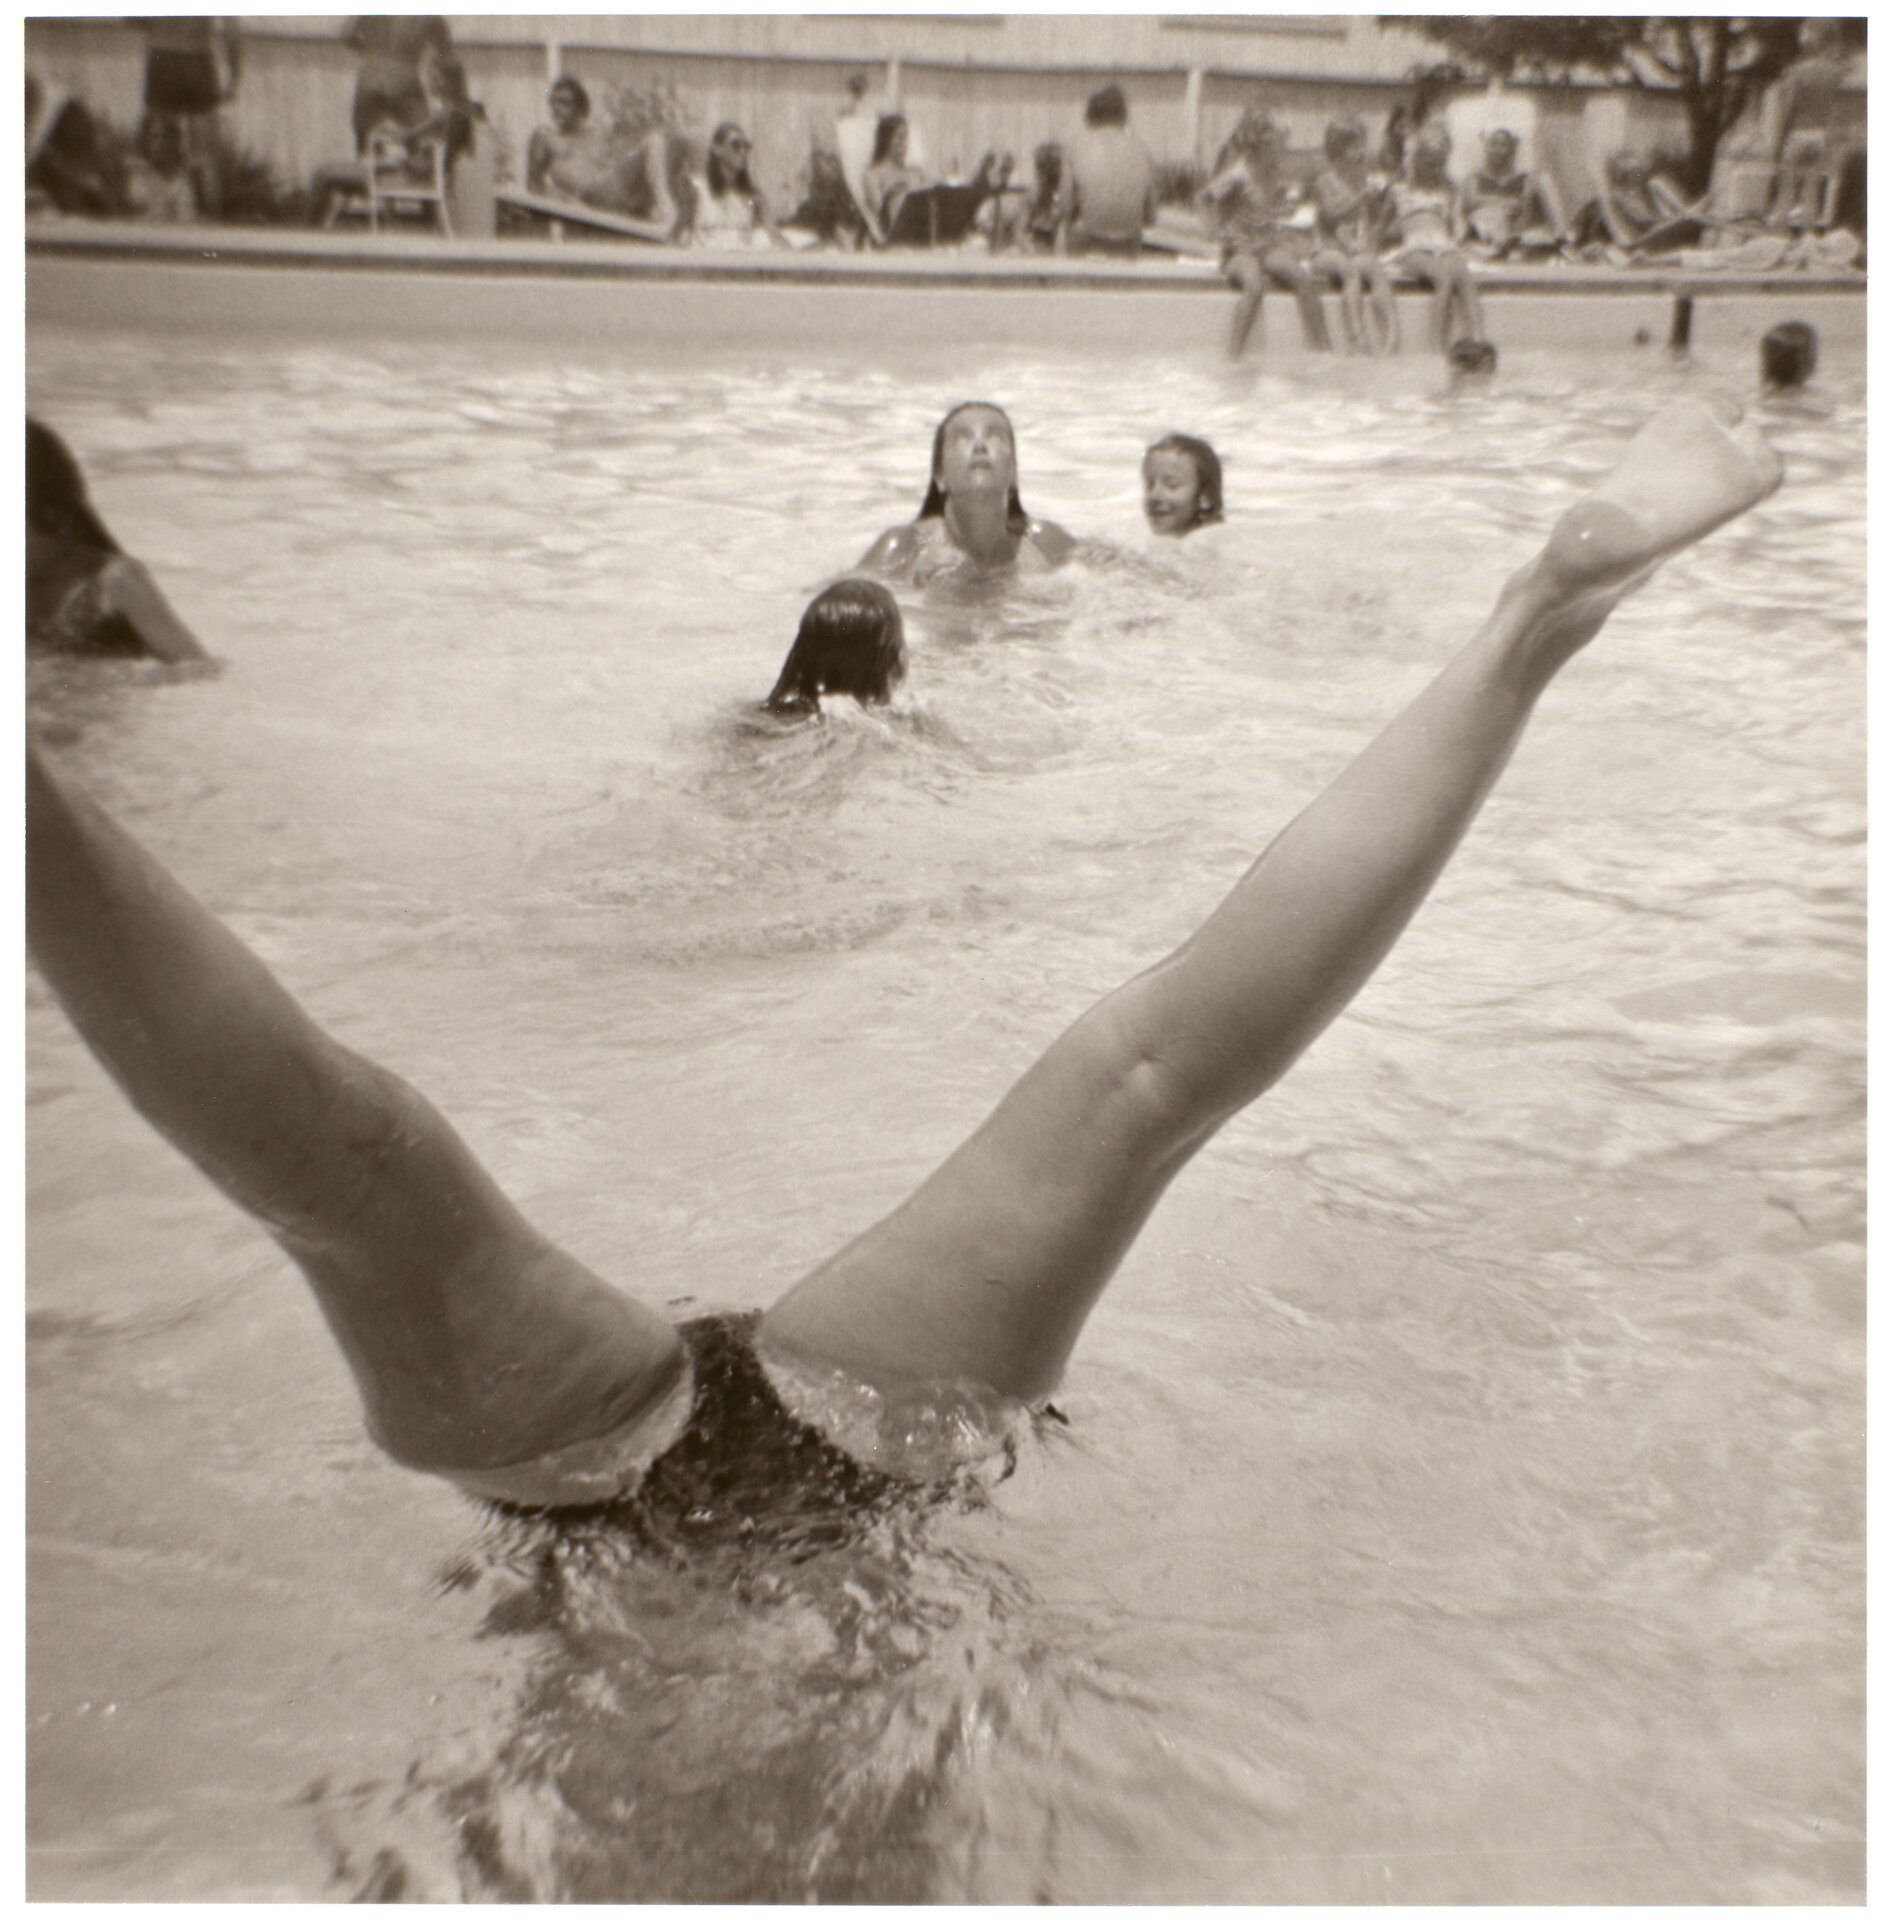   Bea Nettles  (American, b. 1946).  Events in the Water , 1972. From  Events in the Water.  Gelatin silver print. Collection of the artist. © Bea Nettles 